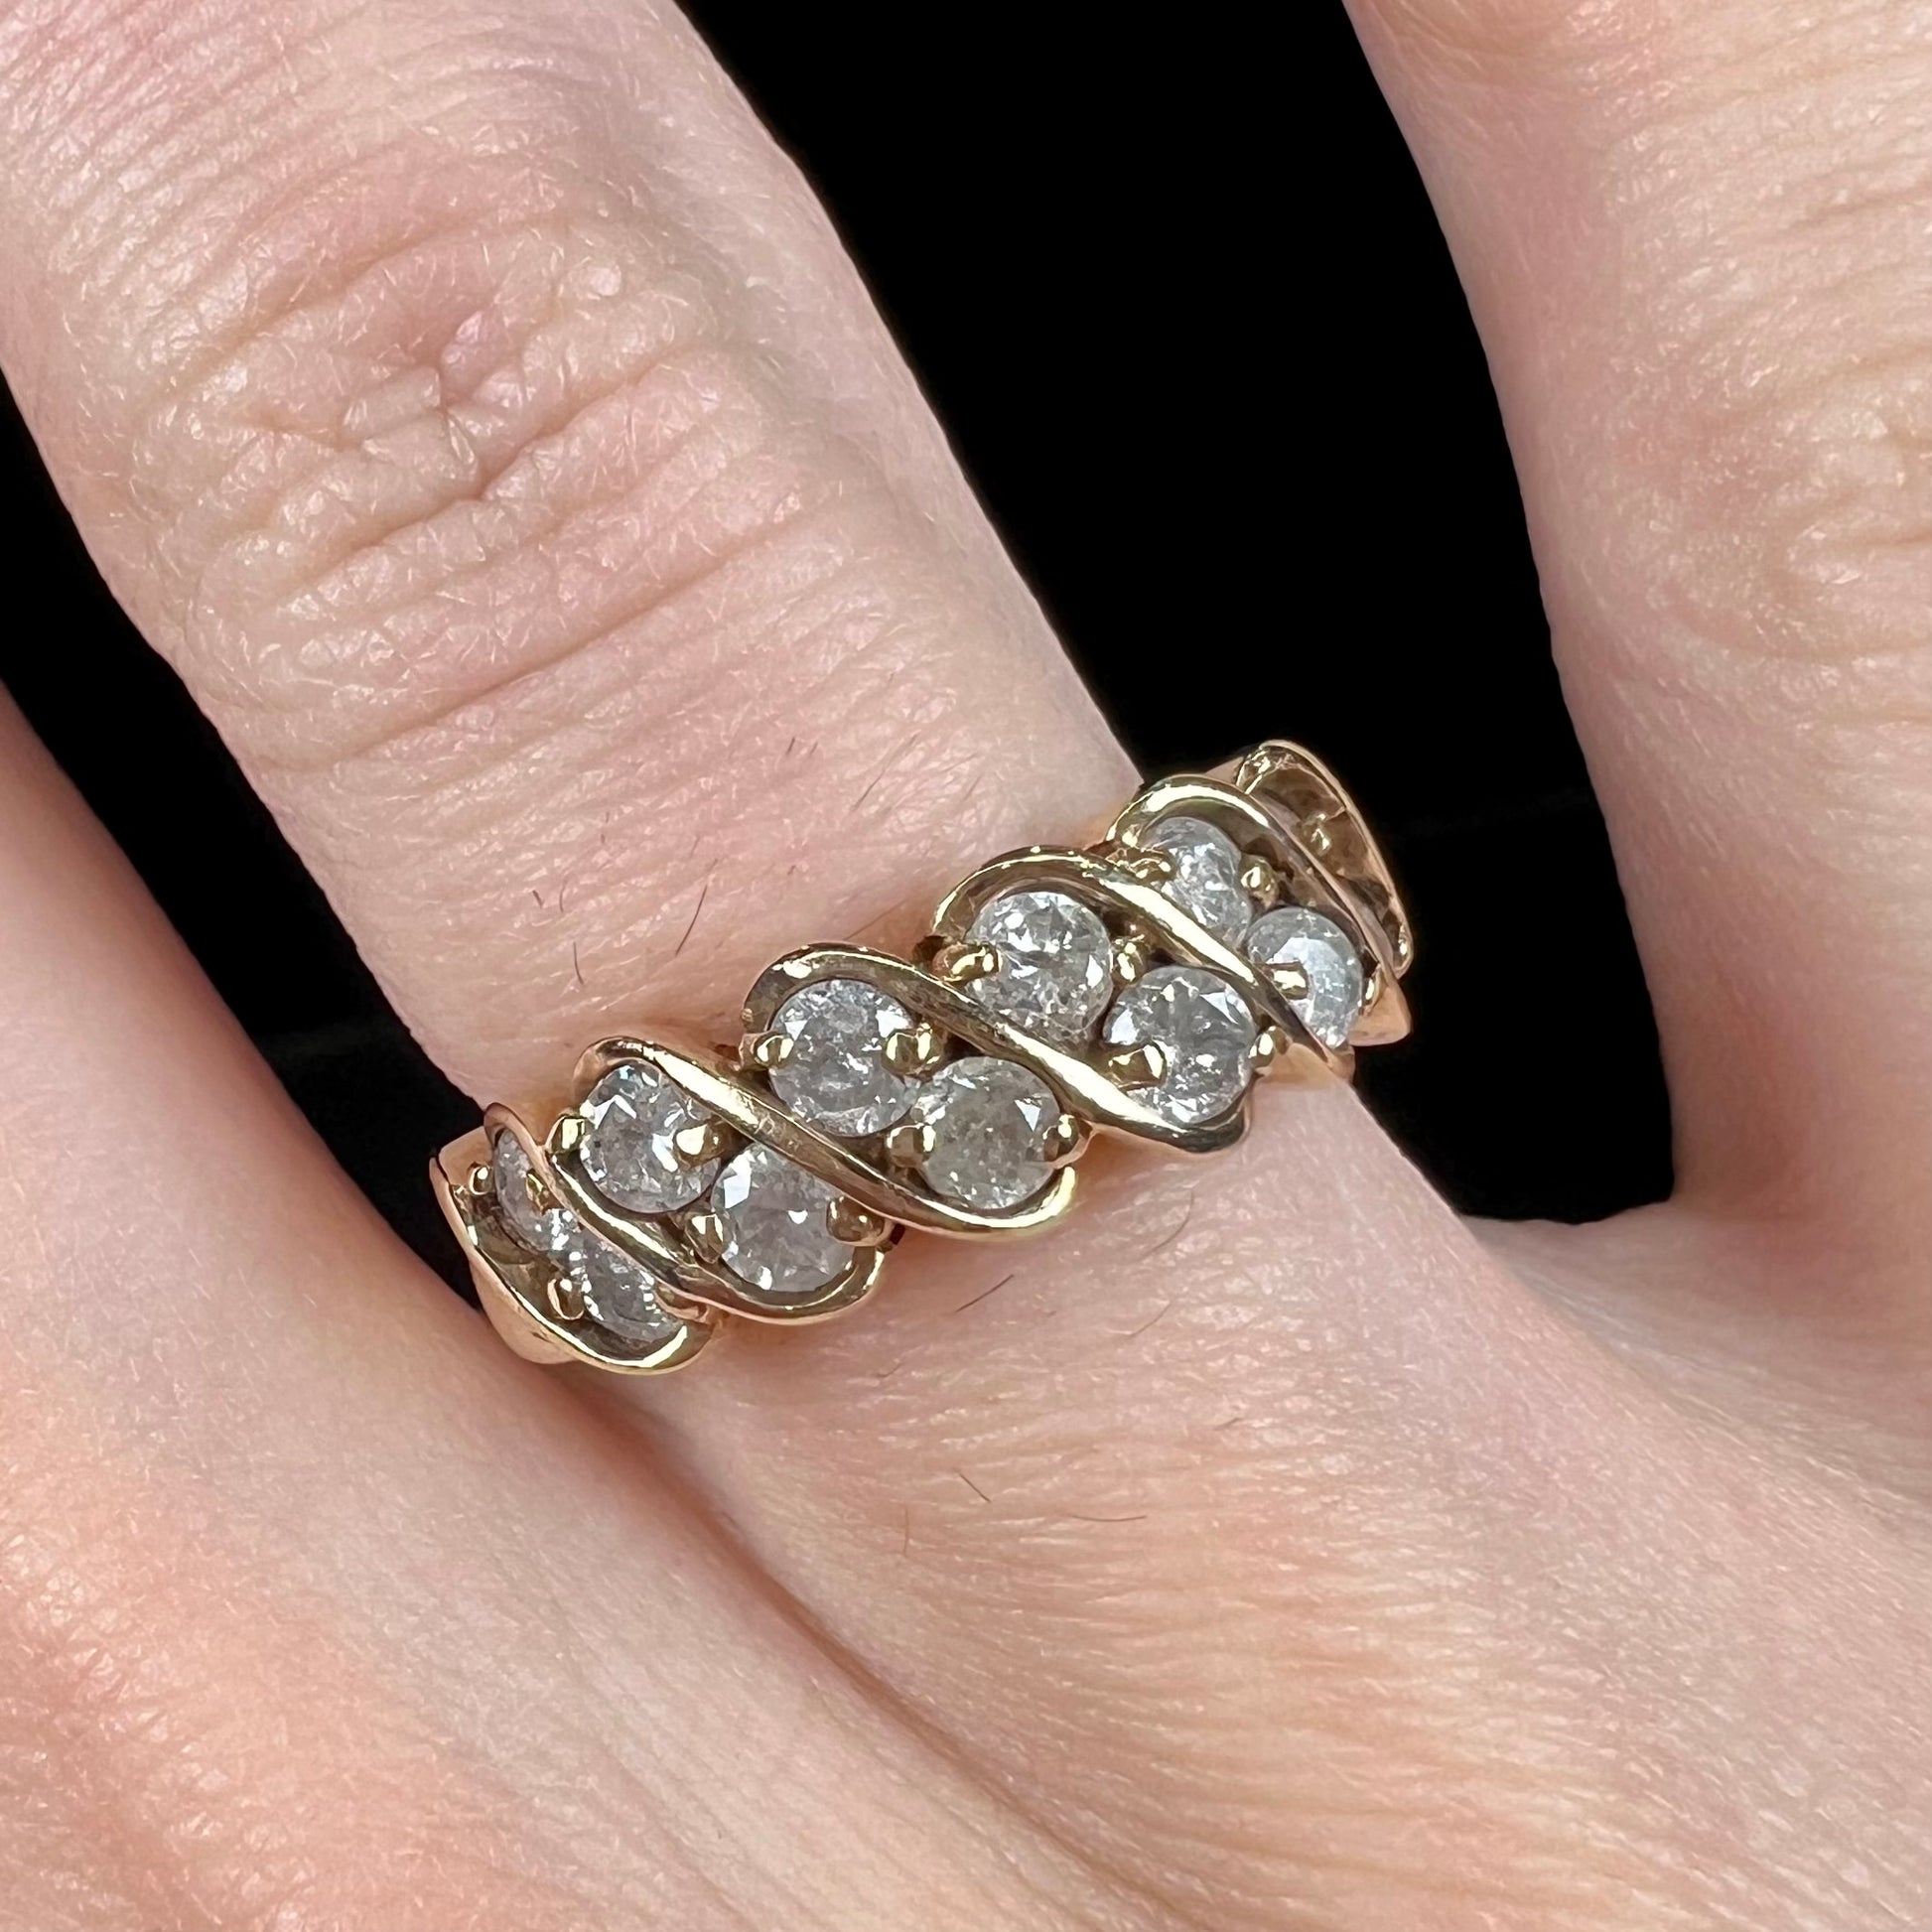 A ladies' estate yellow gold band set with 1 total carat of round brilliant cut diamonds.